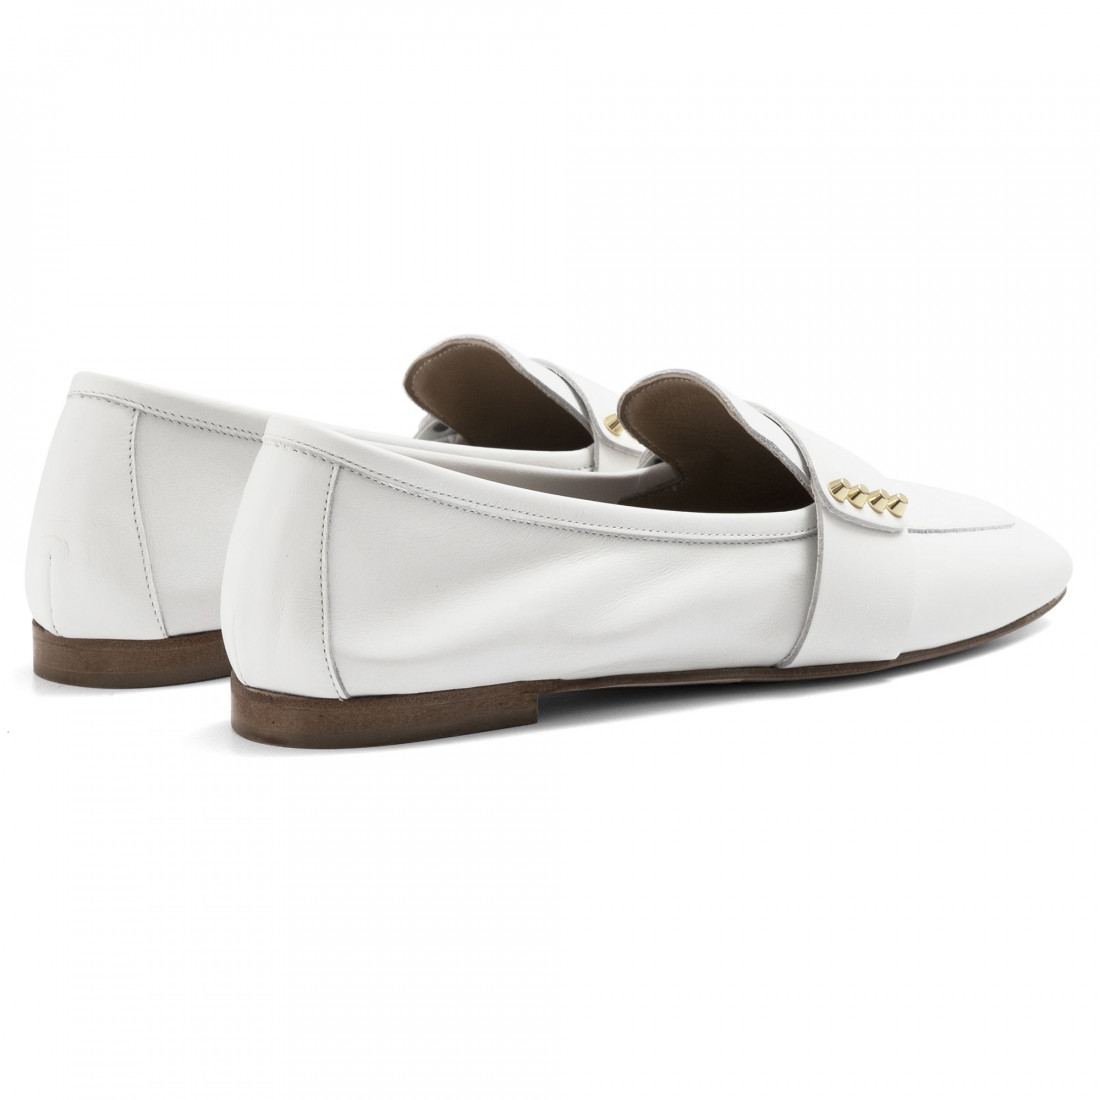 Mocassino donna Nouvelle Femme in nappa bianca